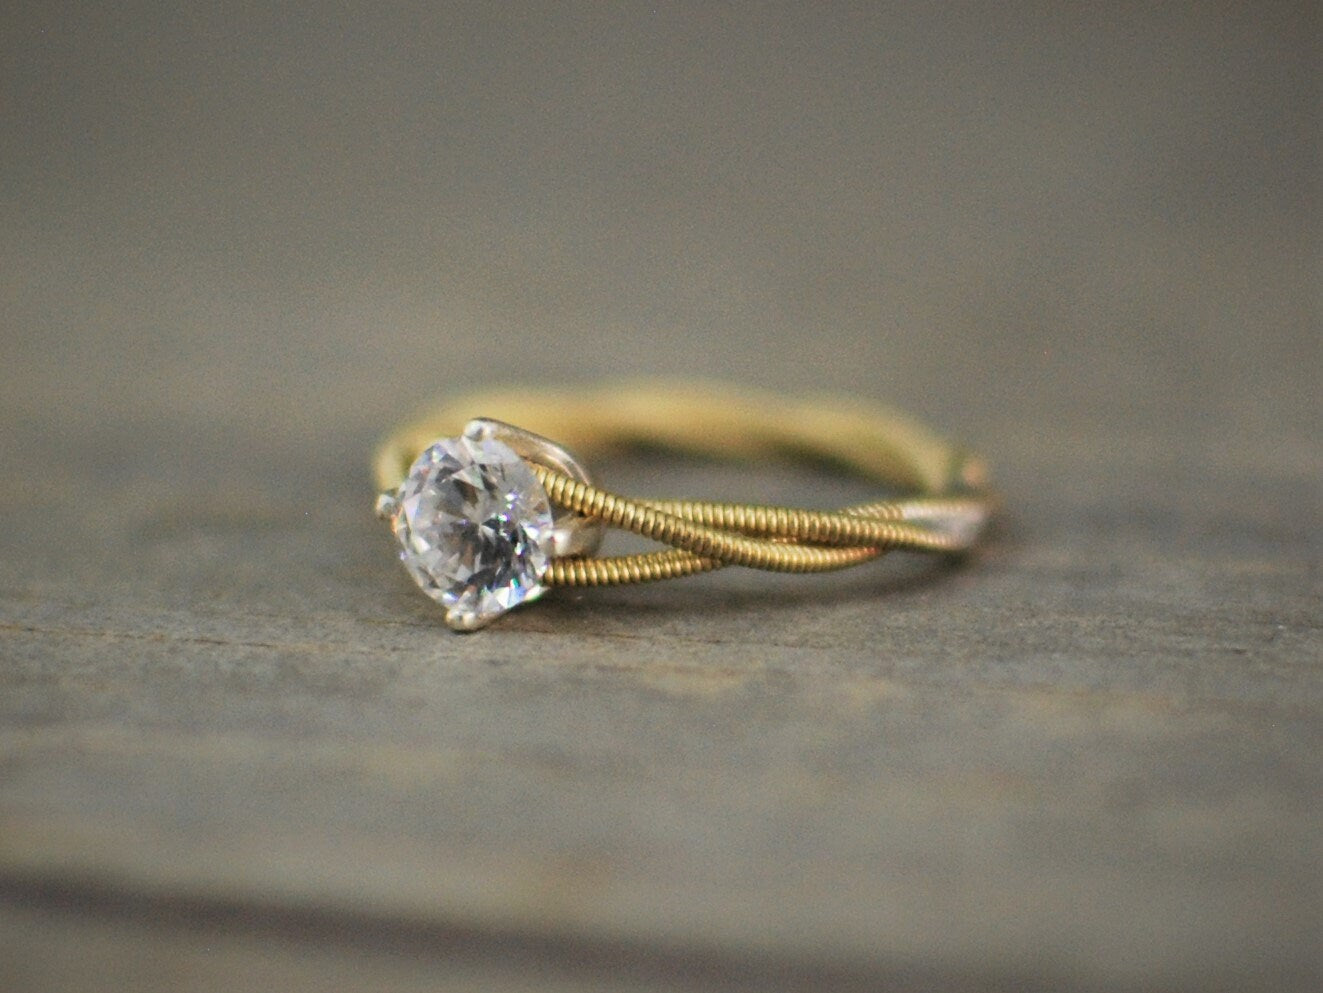 Guitar String Engagement Ring, Purity Ring, Birthstone Ring, Guitar String Jewelry, Unique Engagement Ring, Guitar Gifts, Wedding Ring, Gold